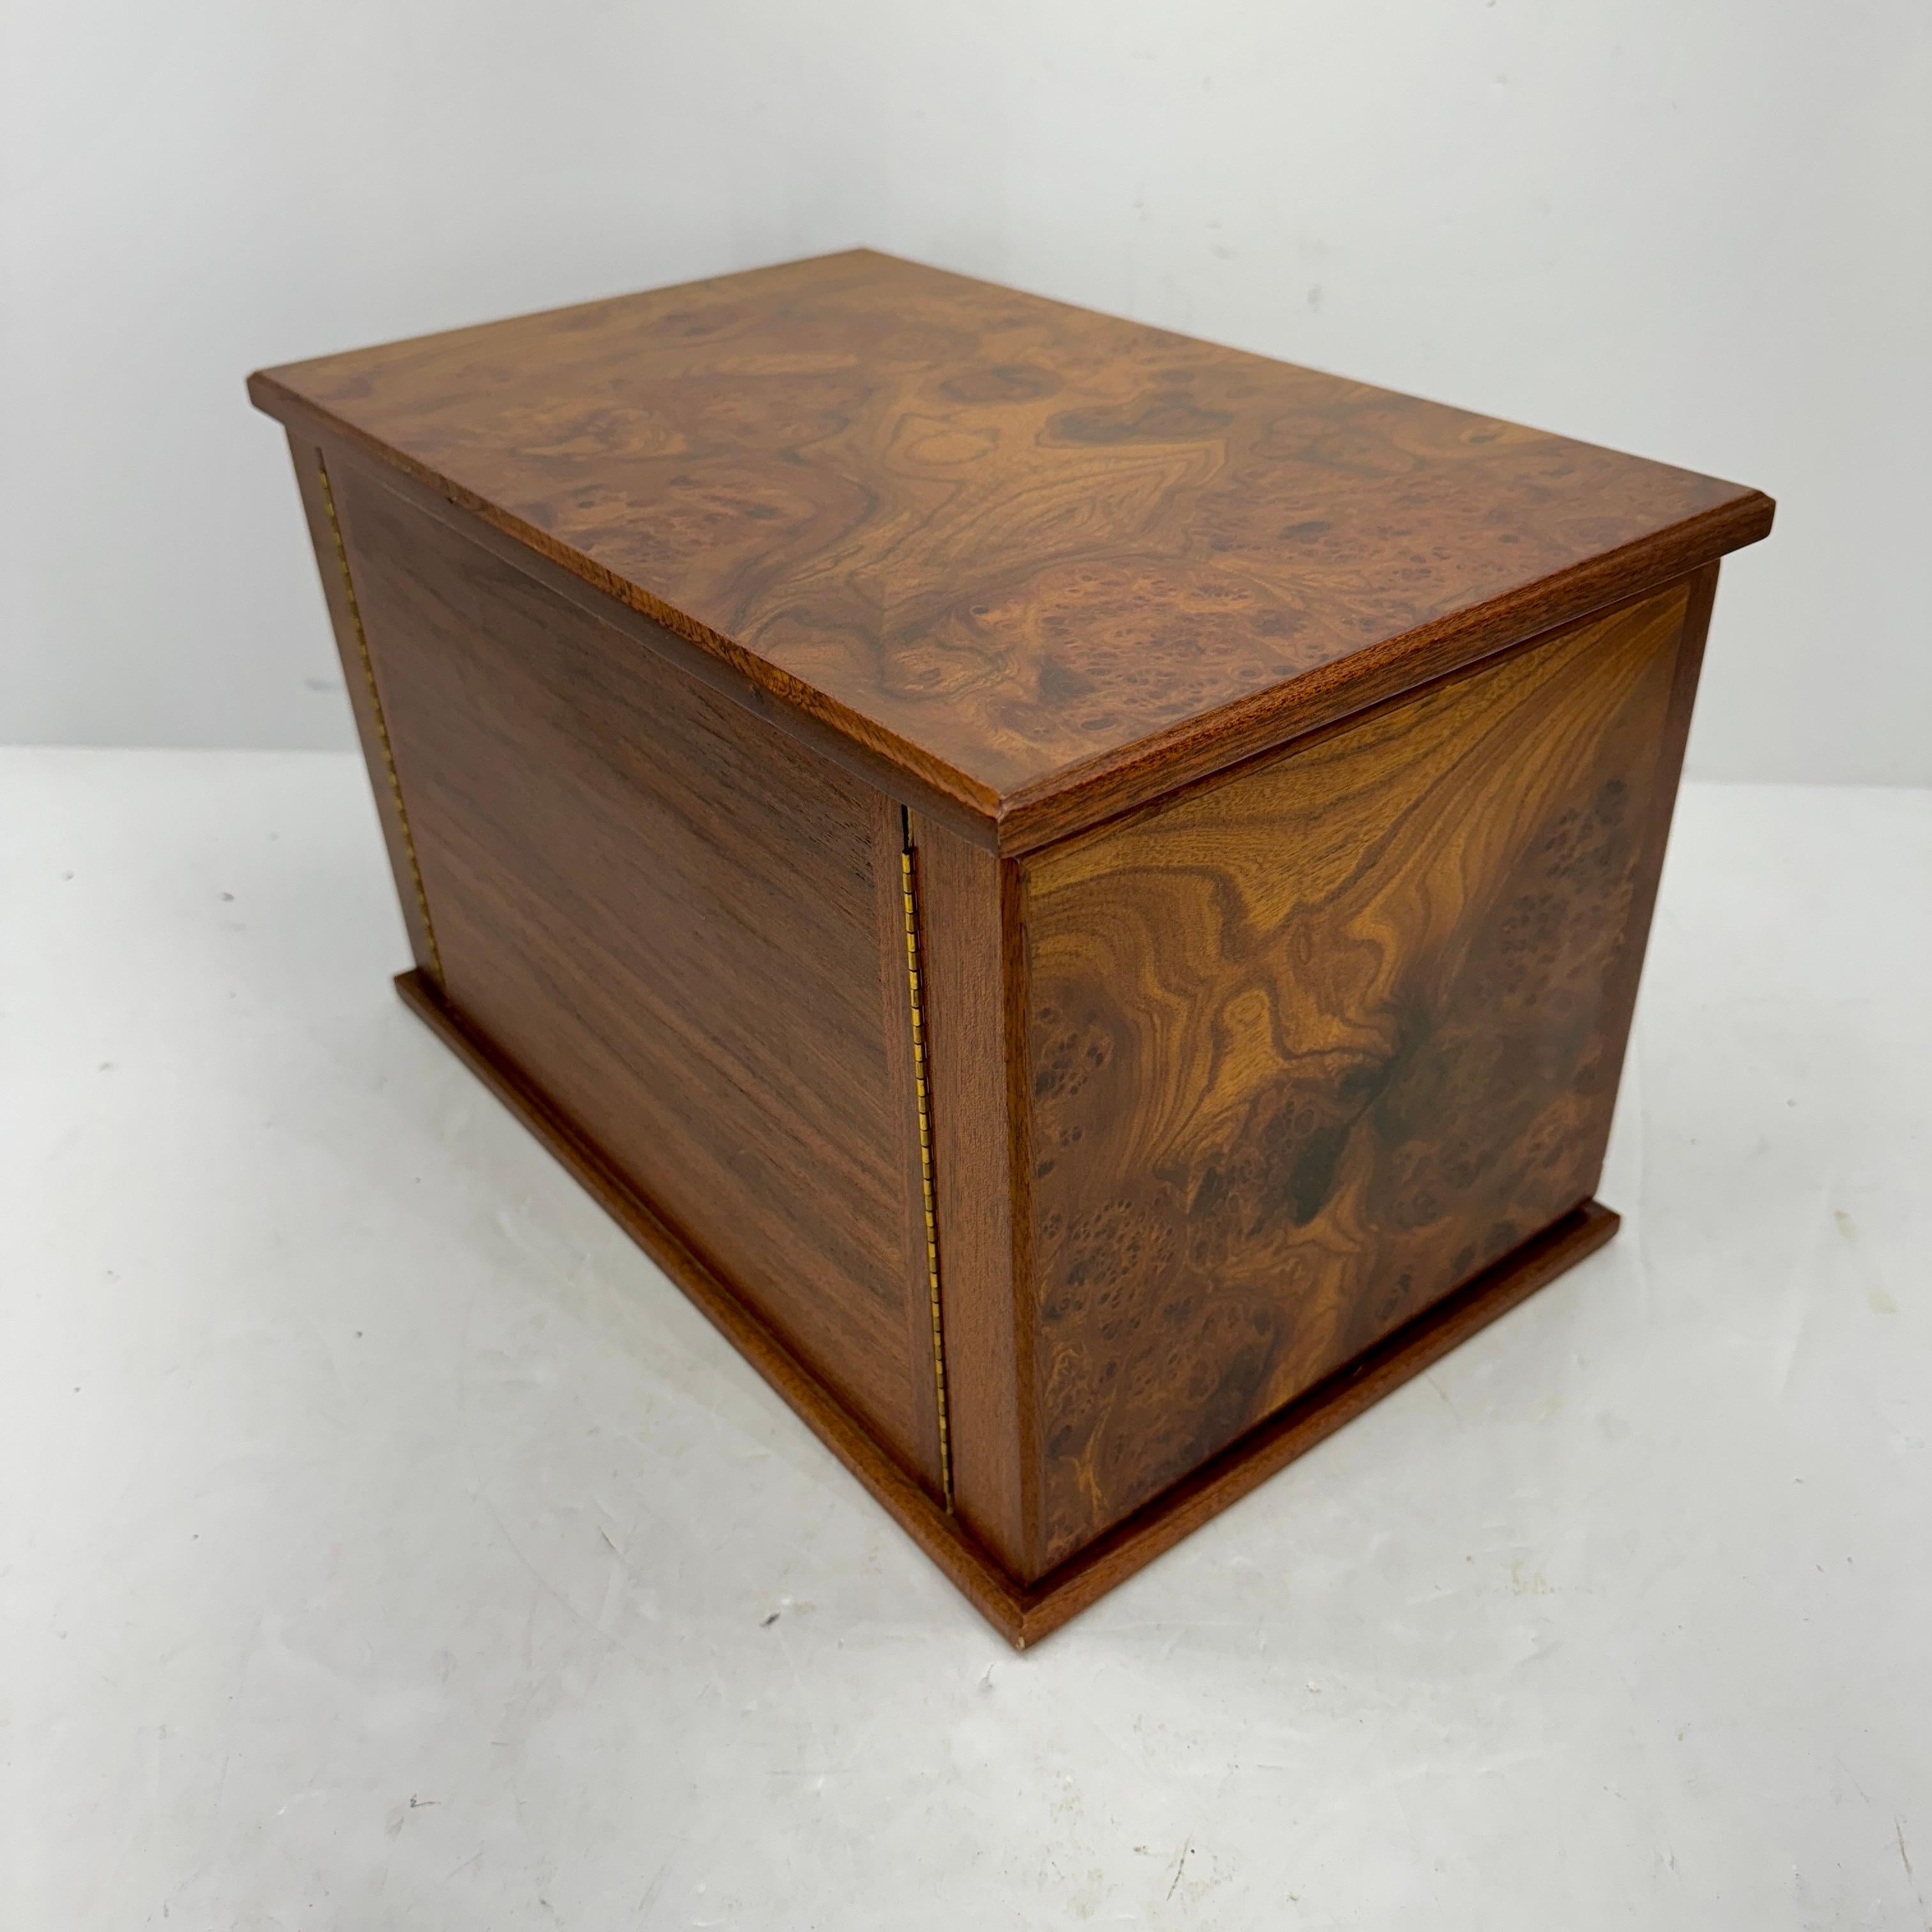 Large Italian Rectangular Burl Wood Jewelry Box With 4 Drawers For Sale 5